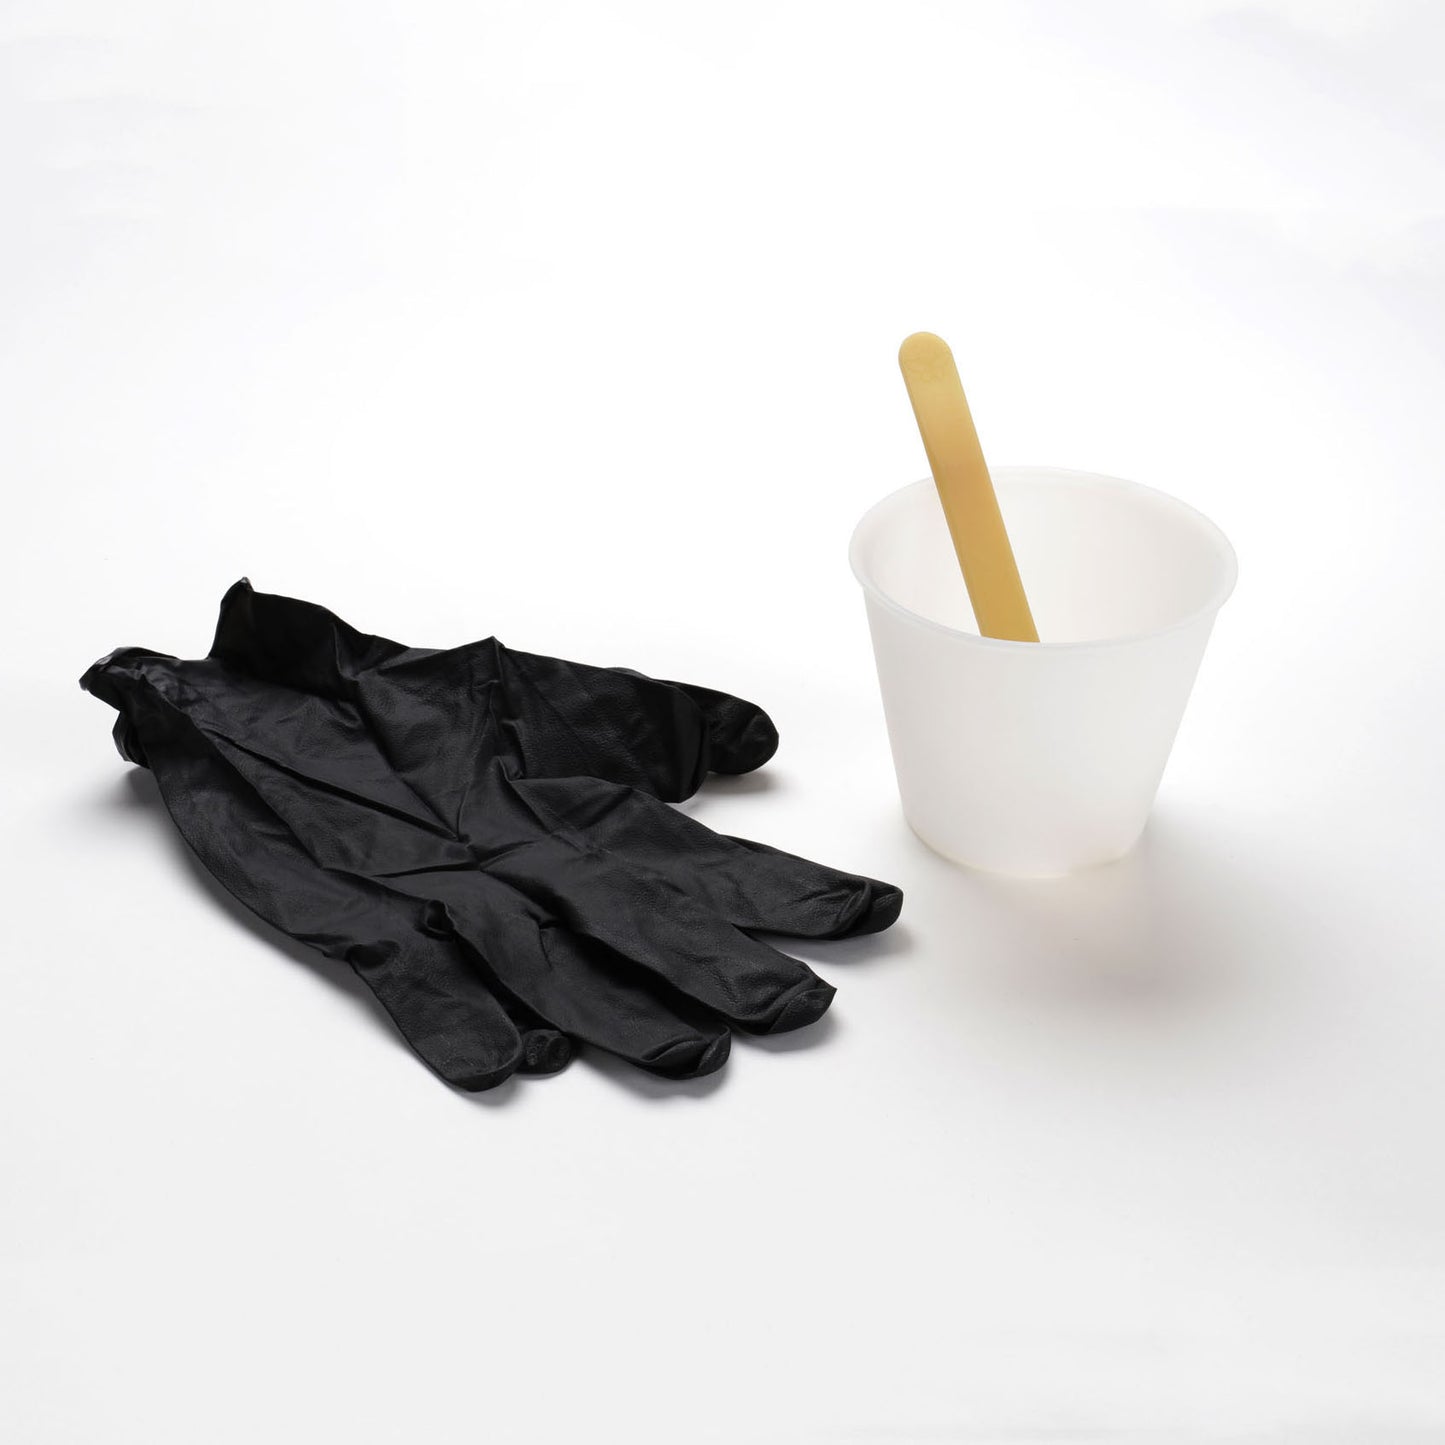 Photo: A large pair of black nitrile (disposable) gloves next to a translucent-clear silicone mixing cup with a beeswax-colored polyurethane mixing stick.